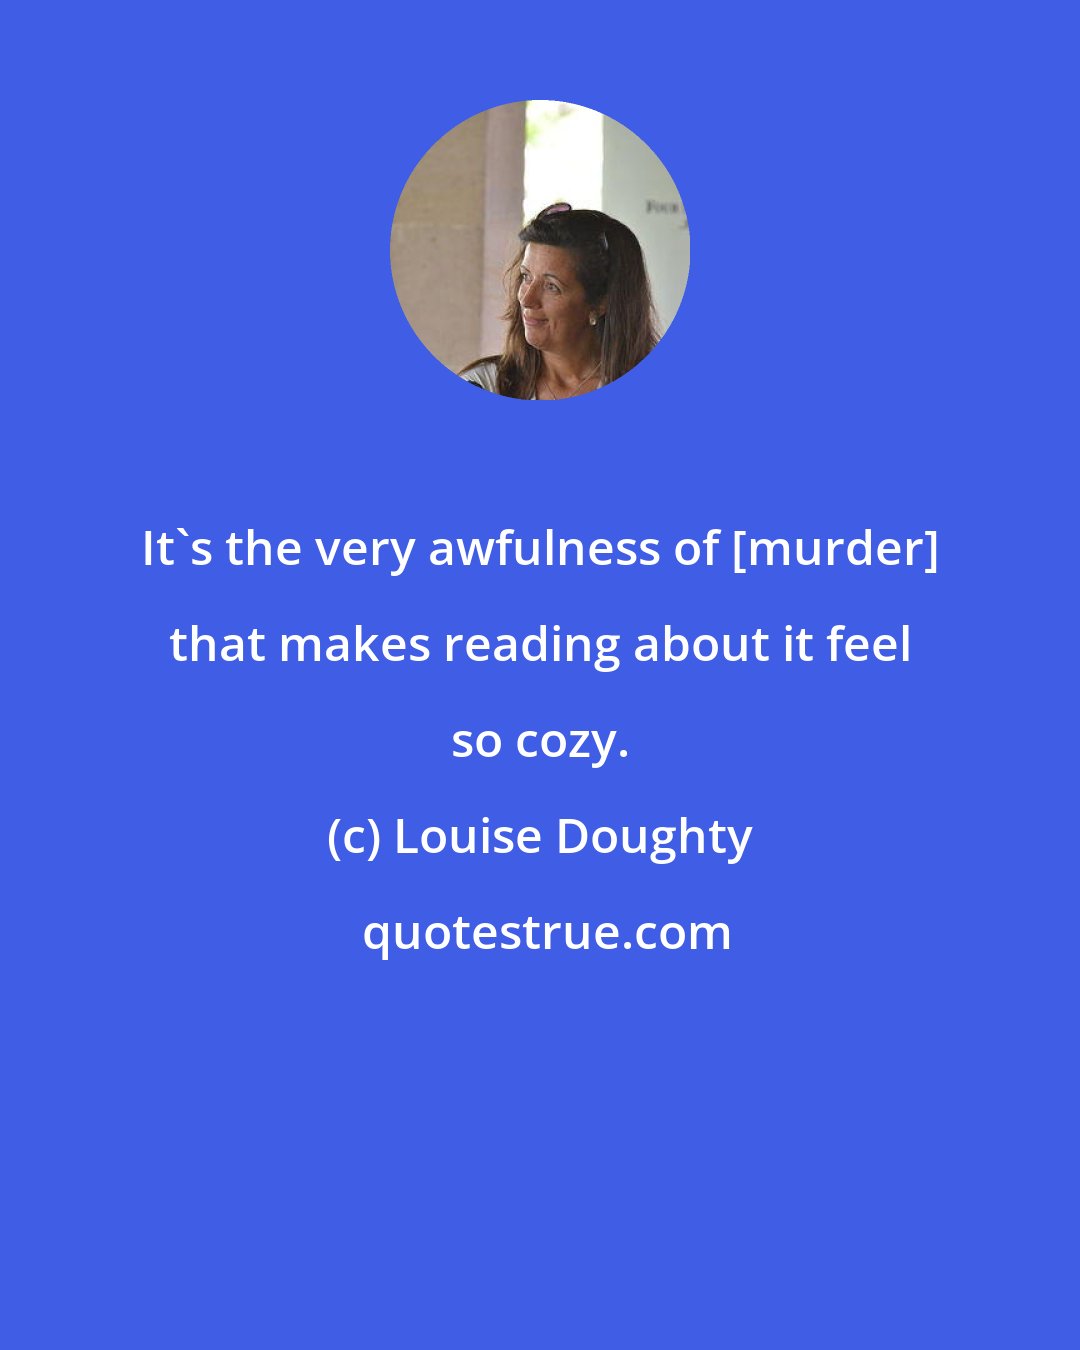 Louise Doughty: It's the very awfulness of [murder] that makes reading about it feel so cozy.